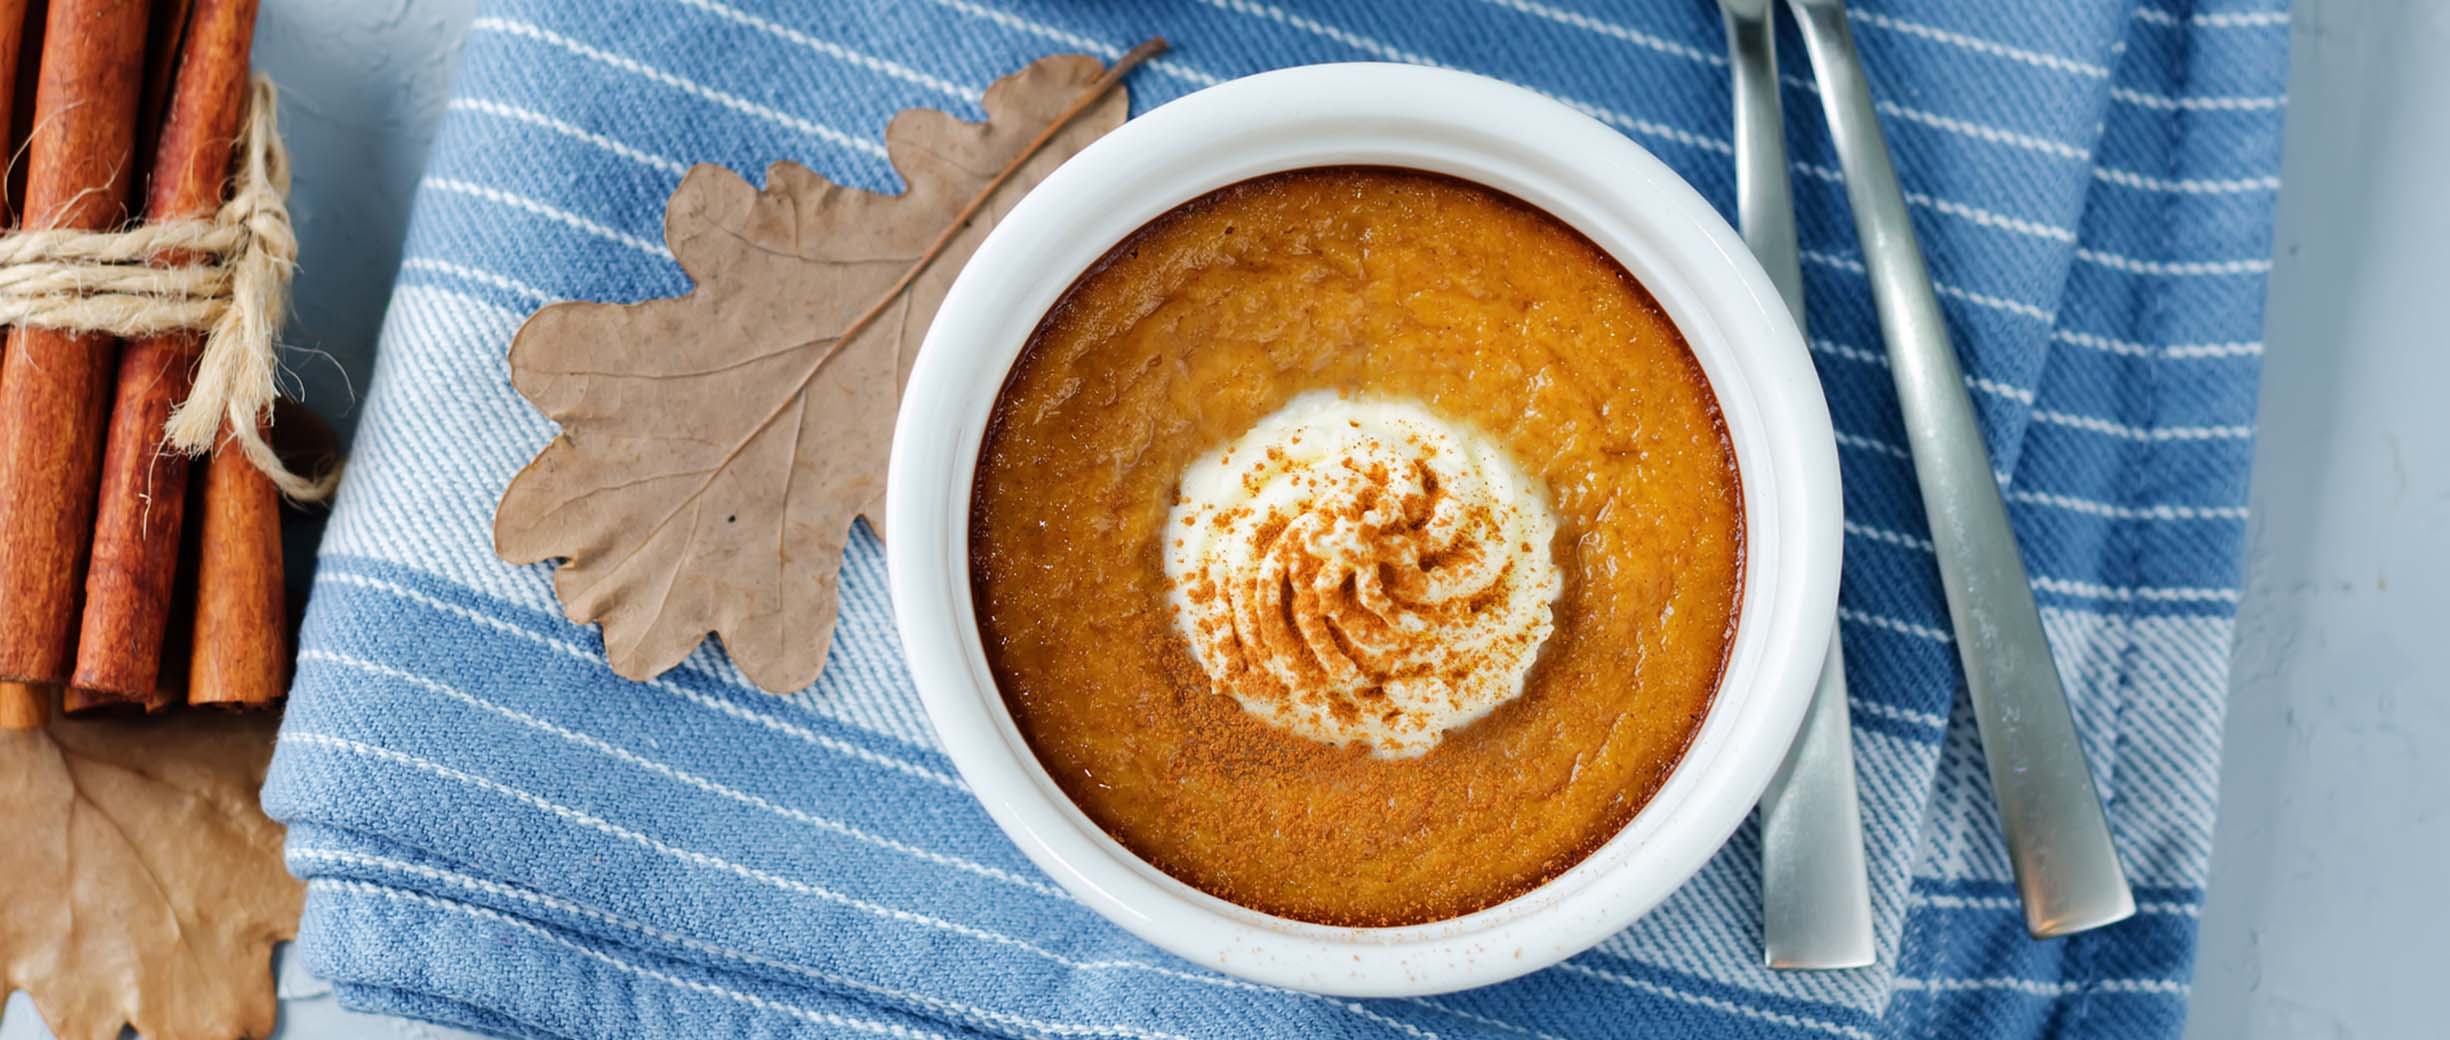 10 Holiday Desserts to Make in a Slow Cooker